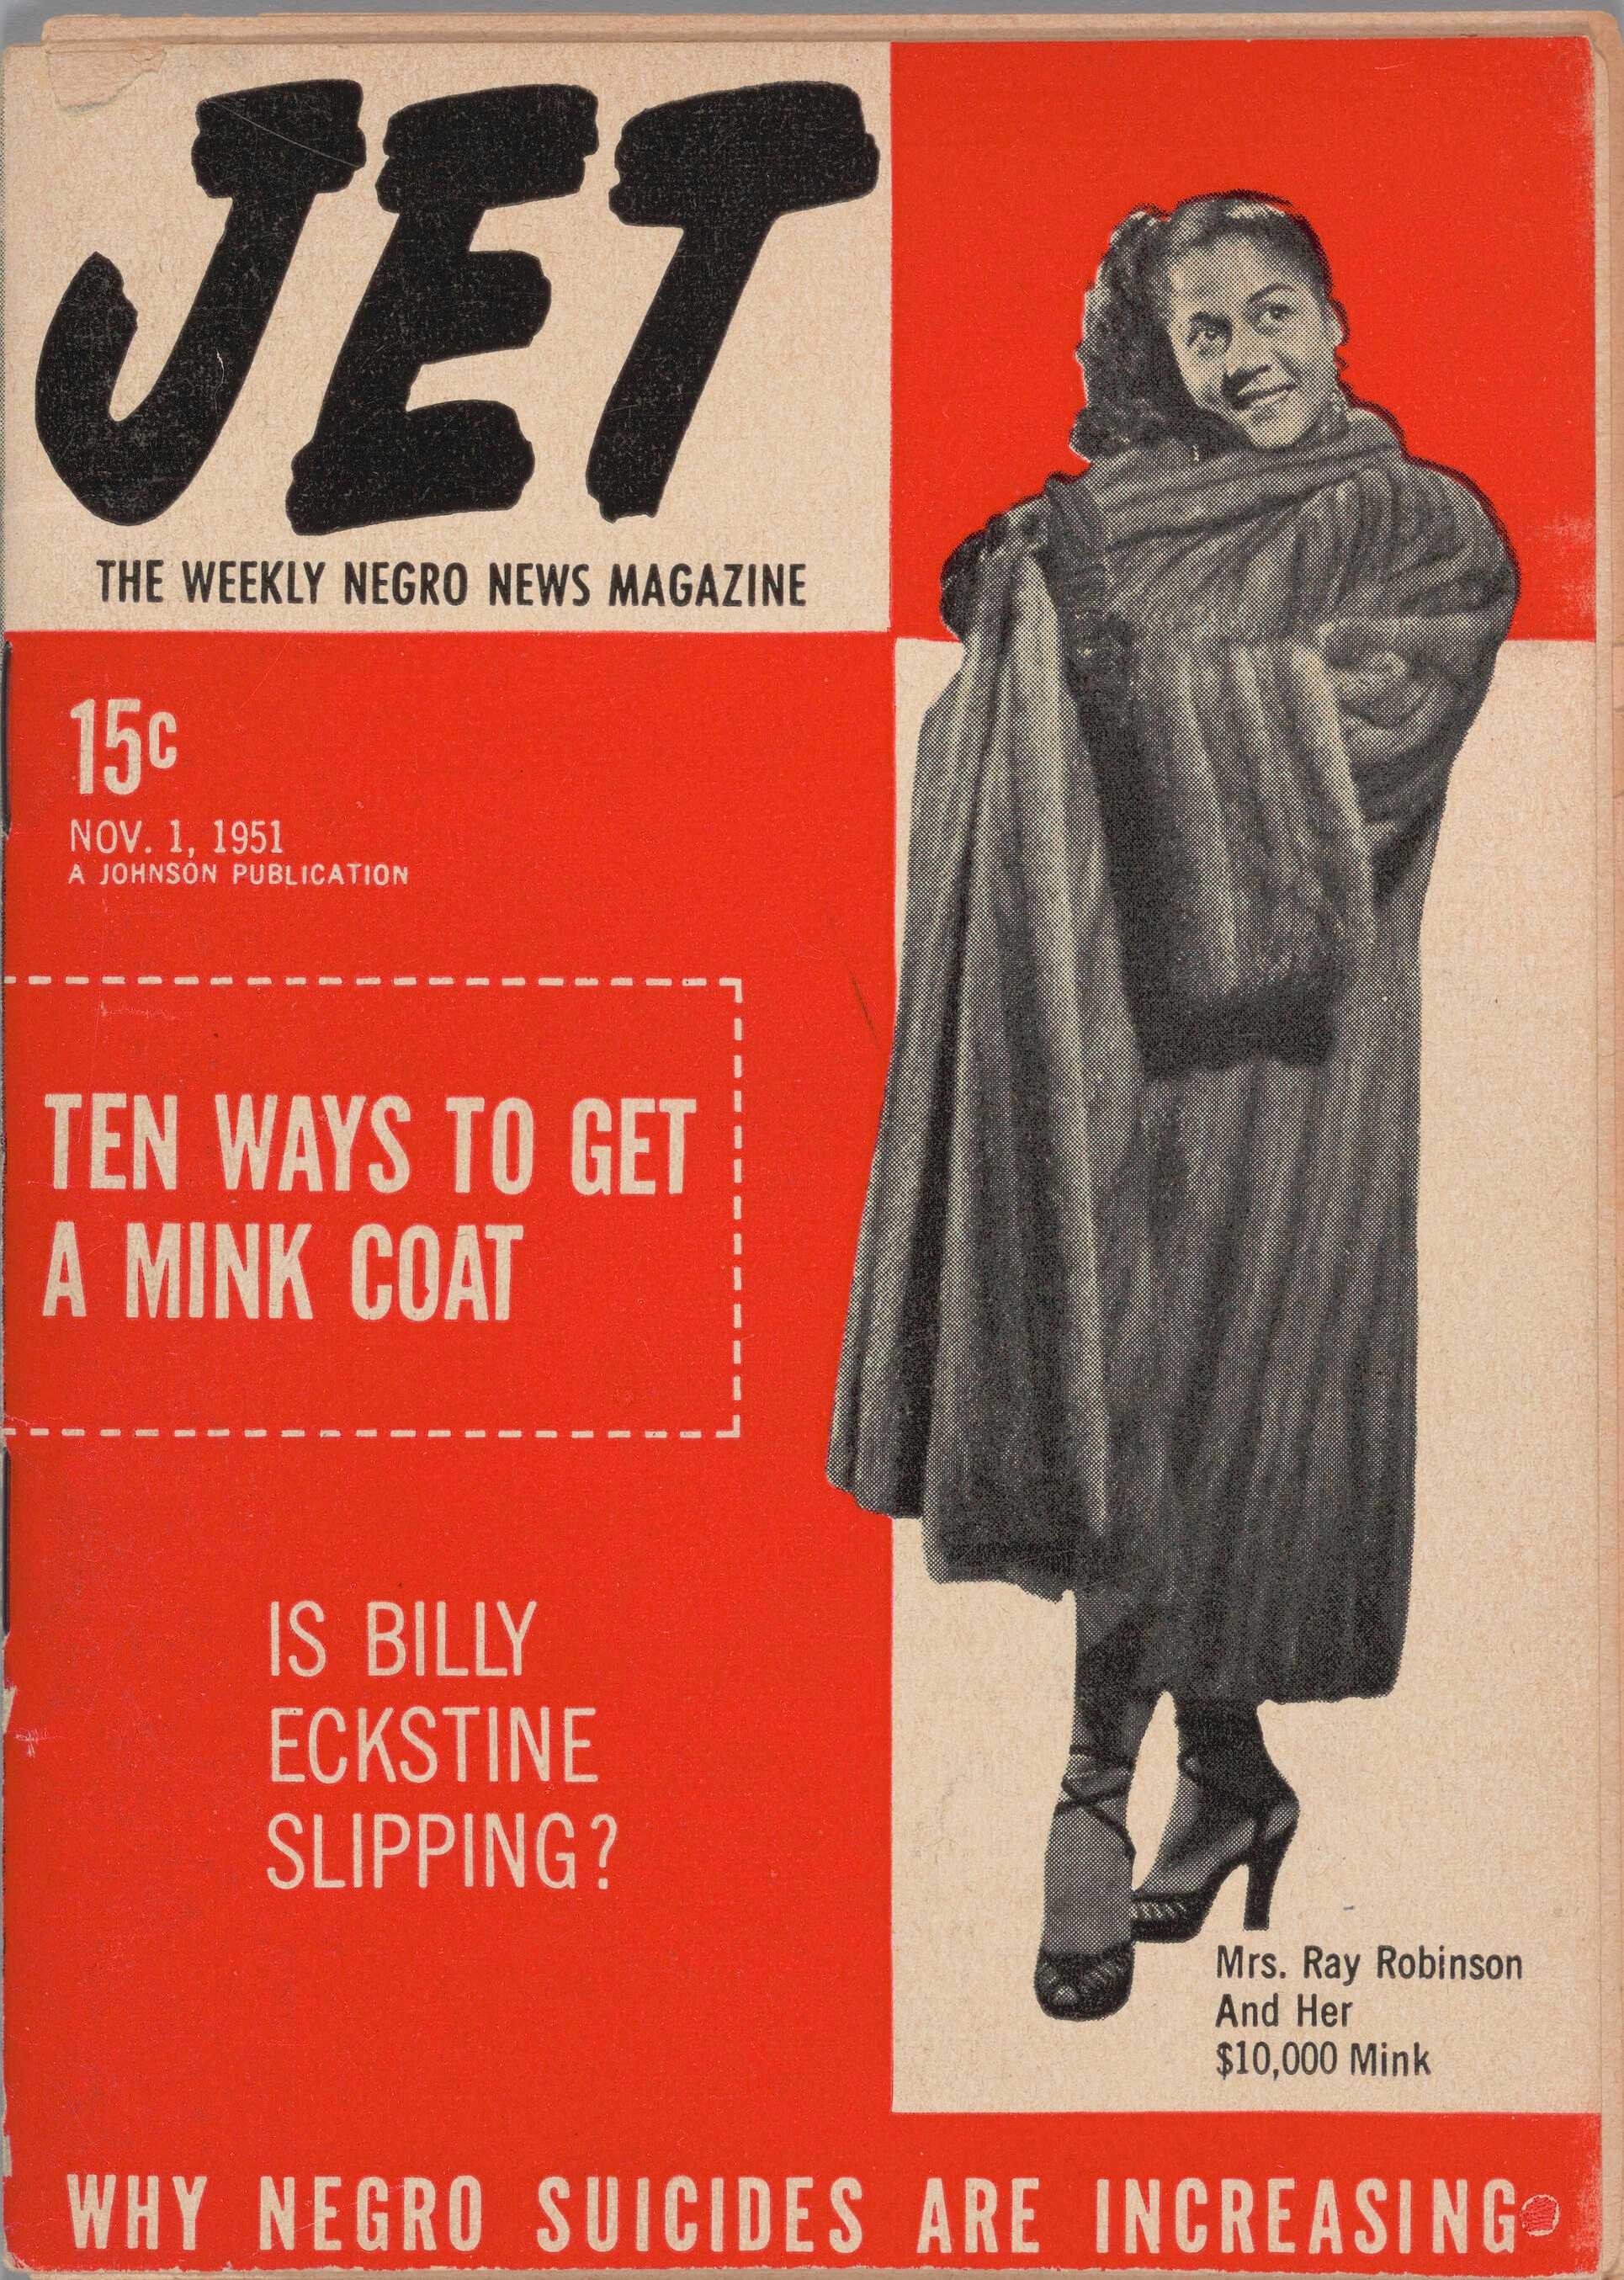 Jet Magazine, volume 1, number 1, featuring a full length black and white image of Mrs. Ray Robinson, against a red and white background.